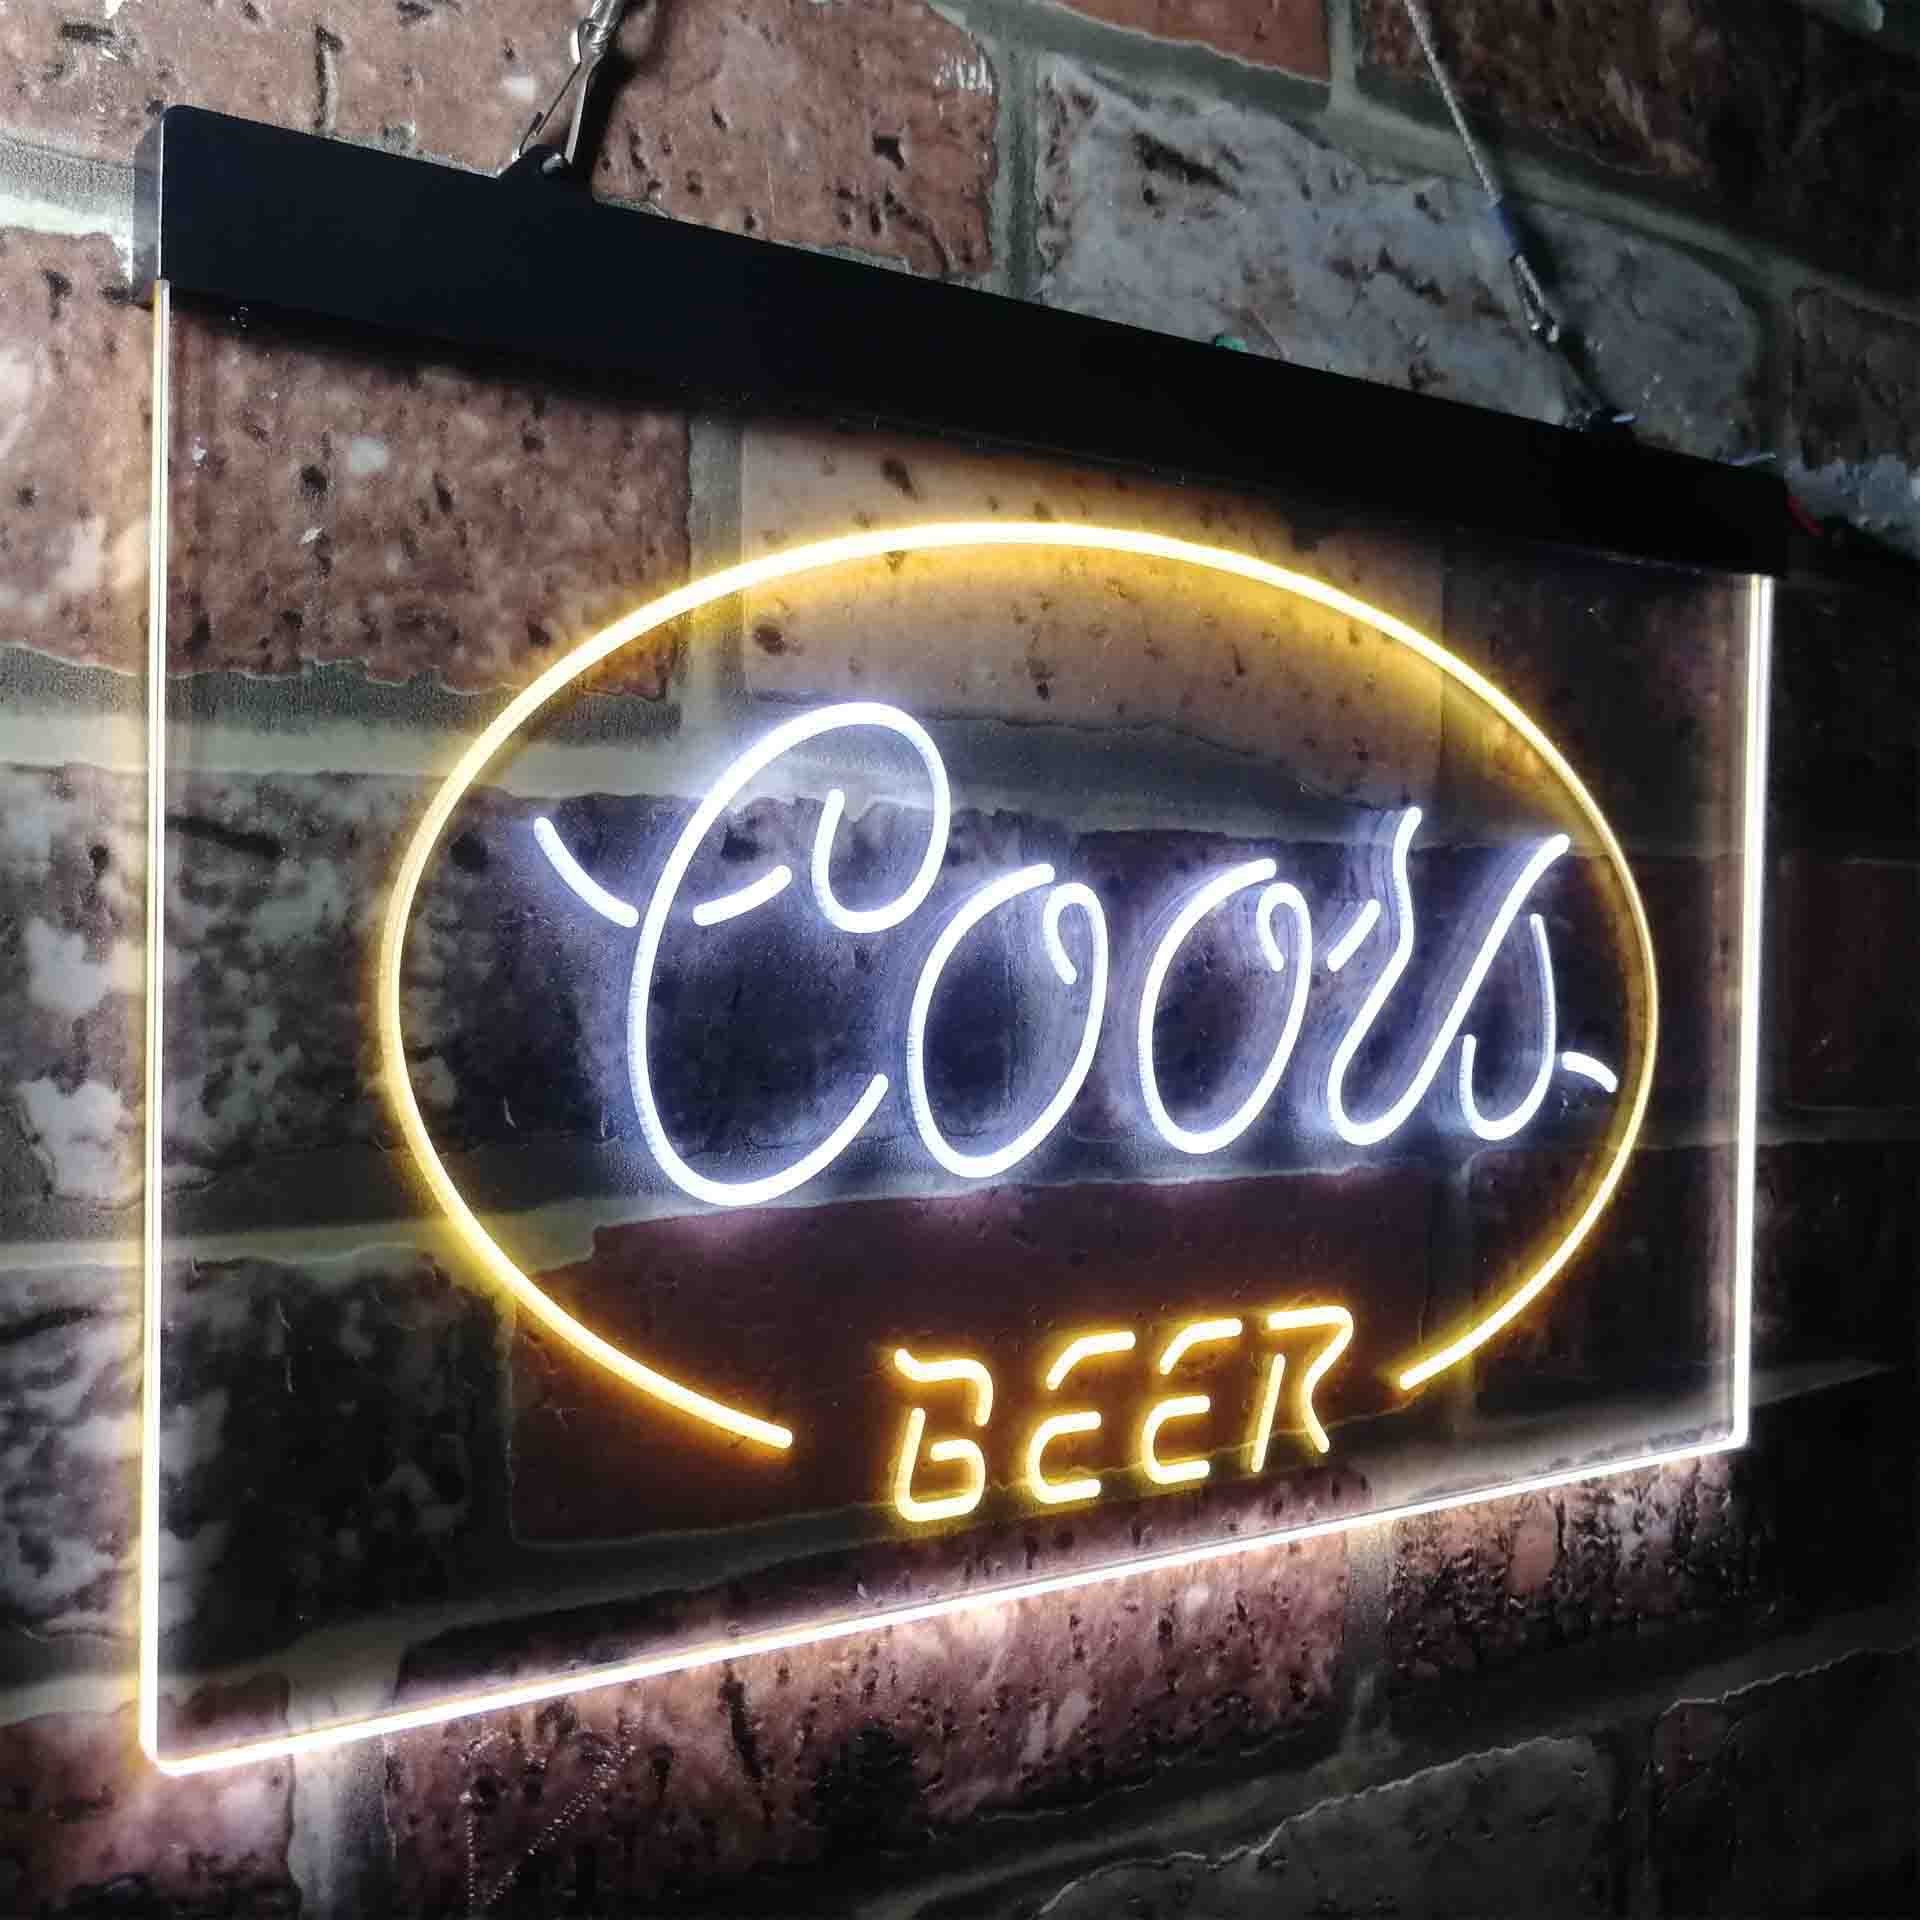 Coors Beer Oval Classic Neon-Like LED Sign